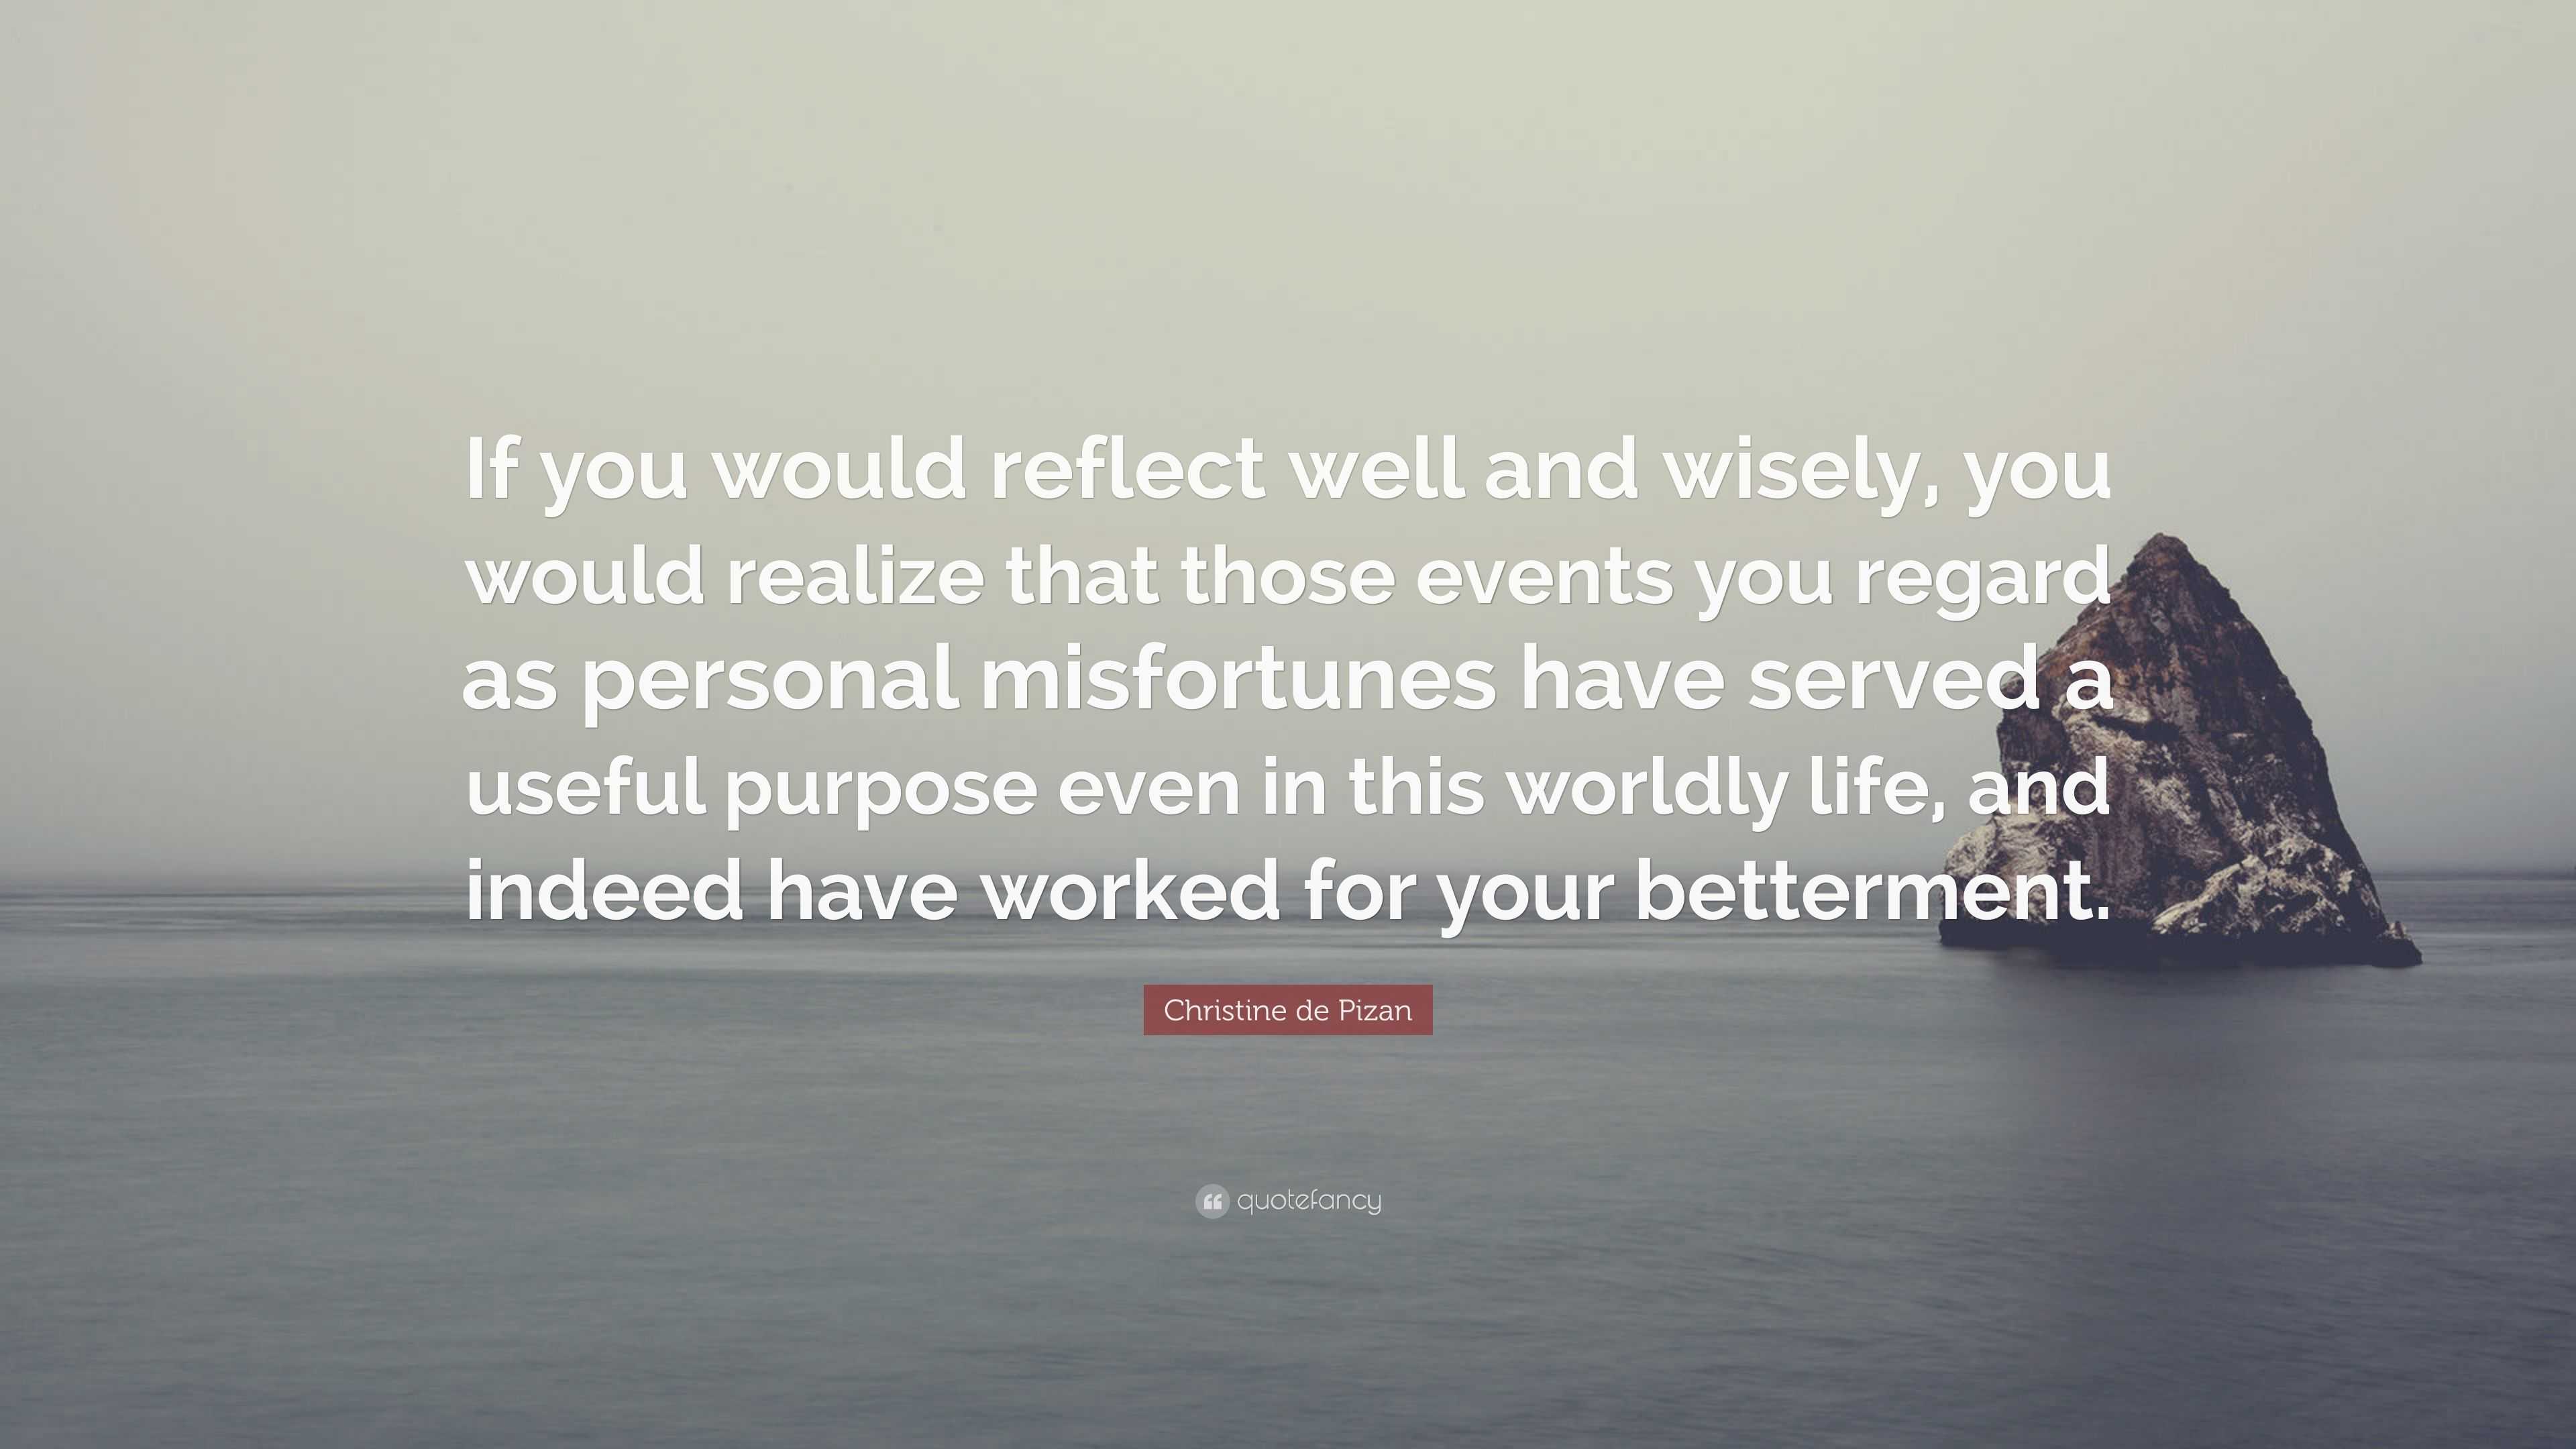 Christine de Pizan Quote: “If you would reflect well and wisely, you ...